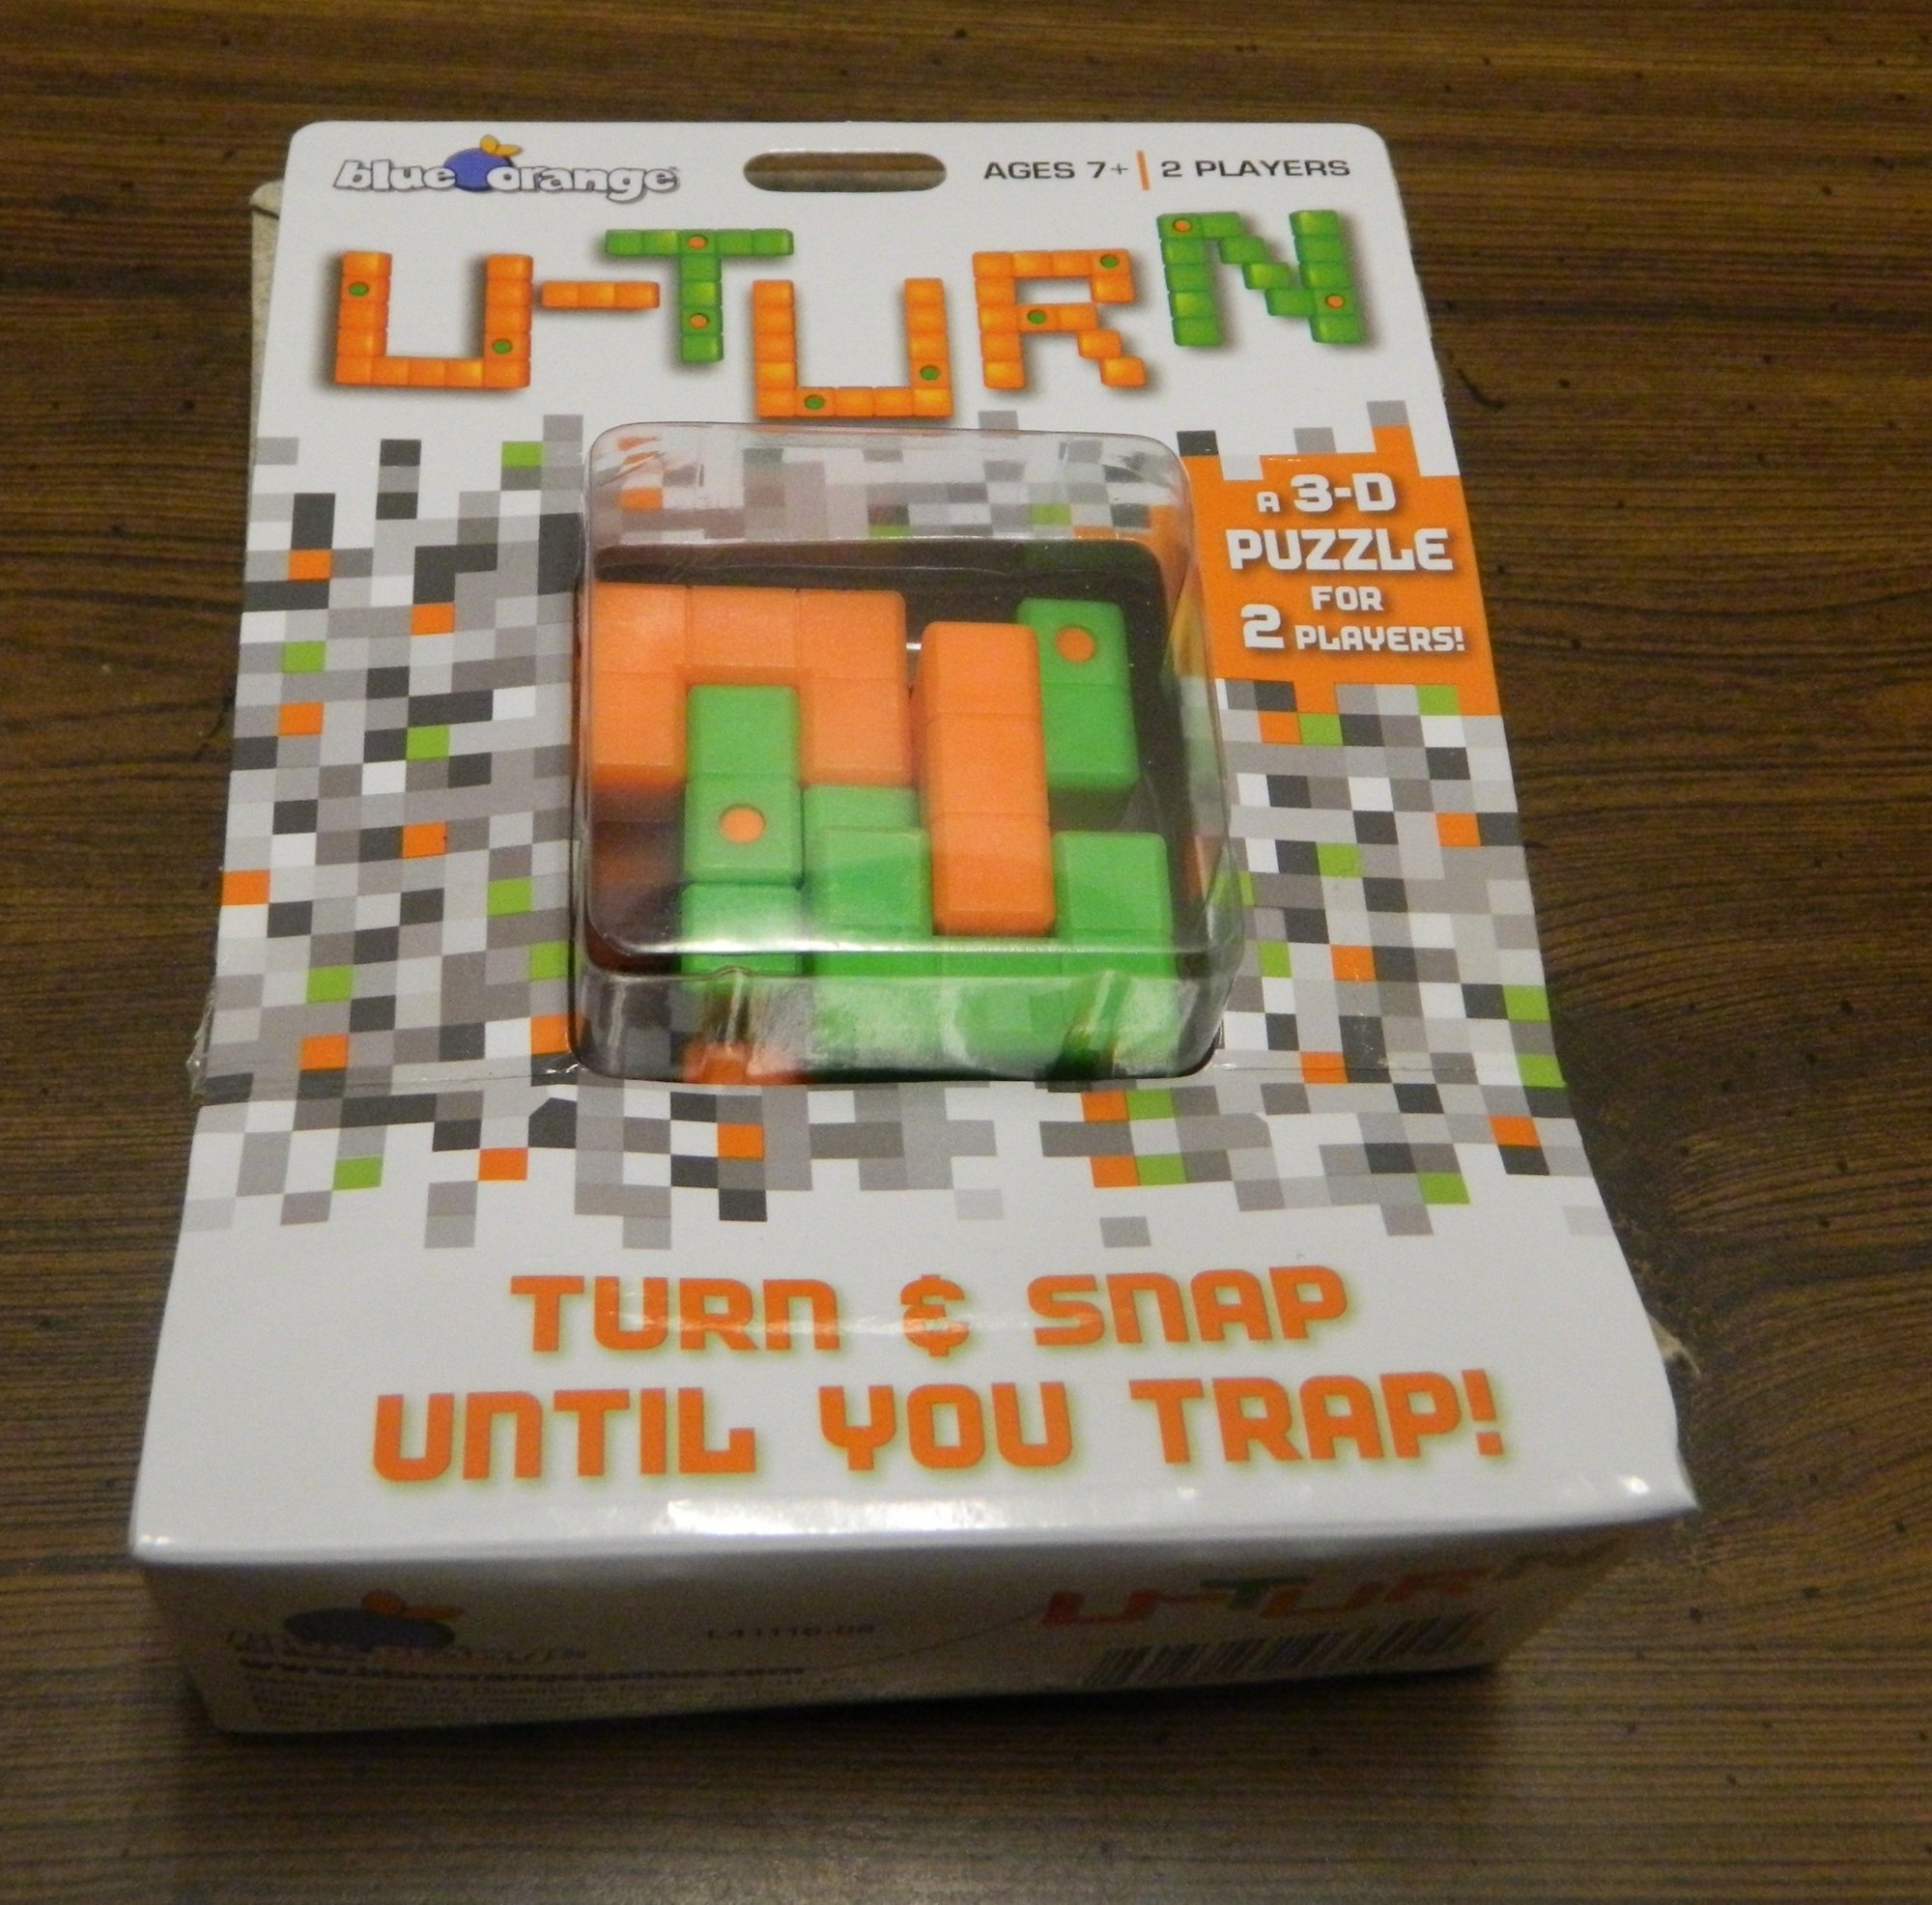 U-Turn Board Game Review and Rules